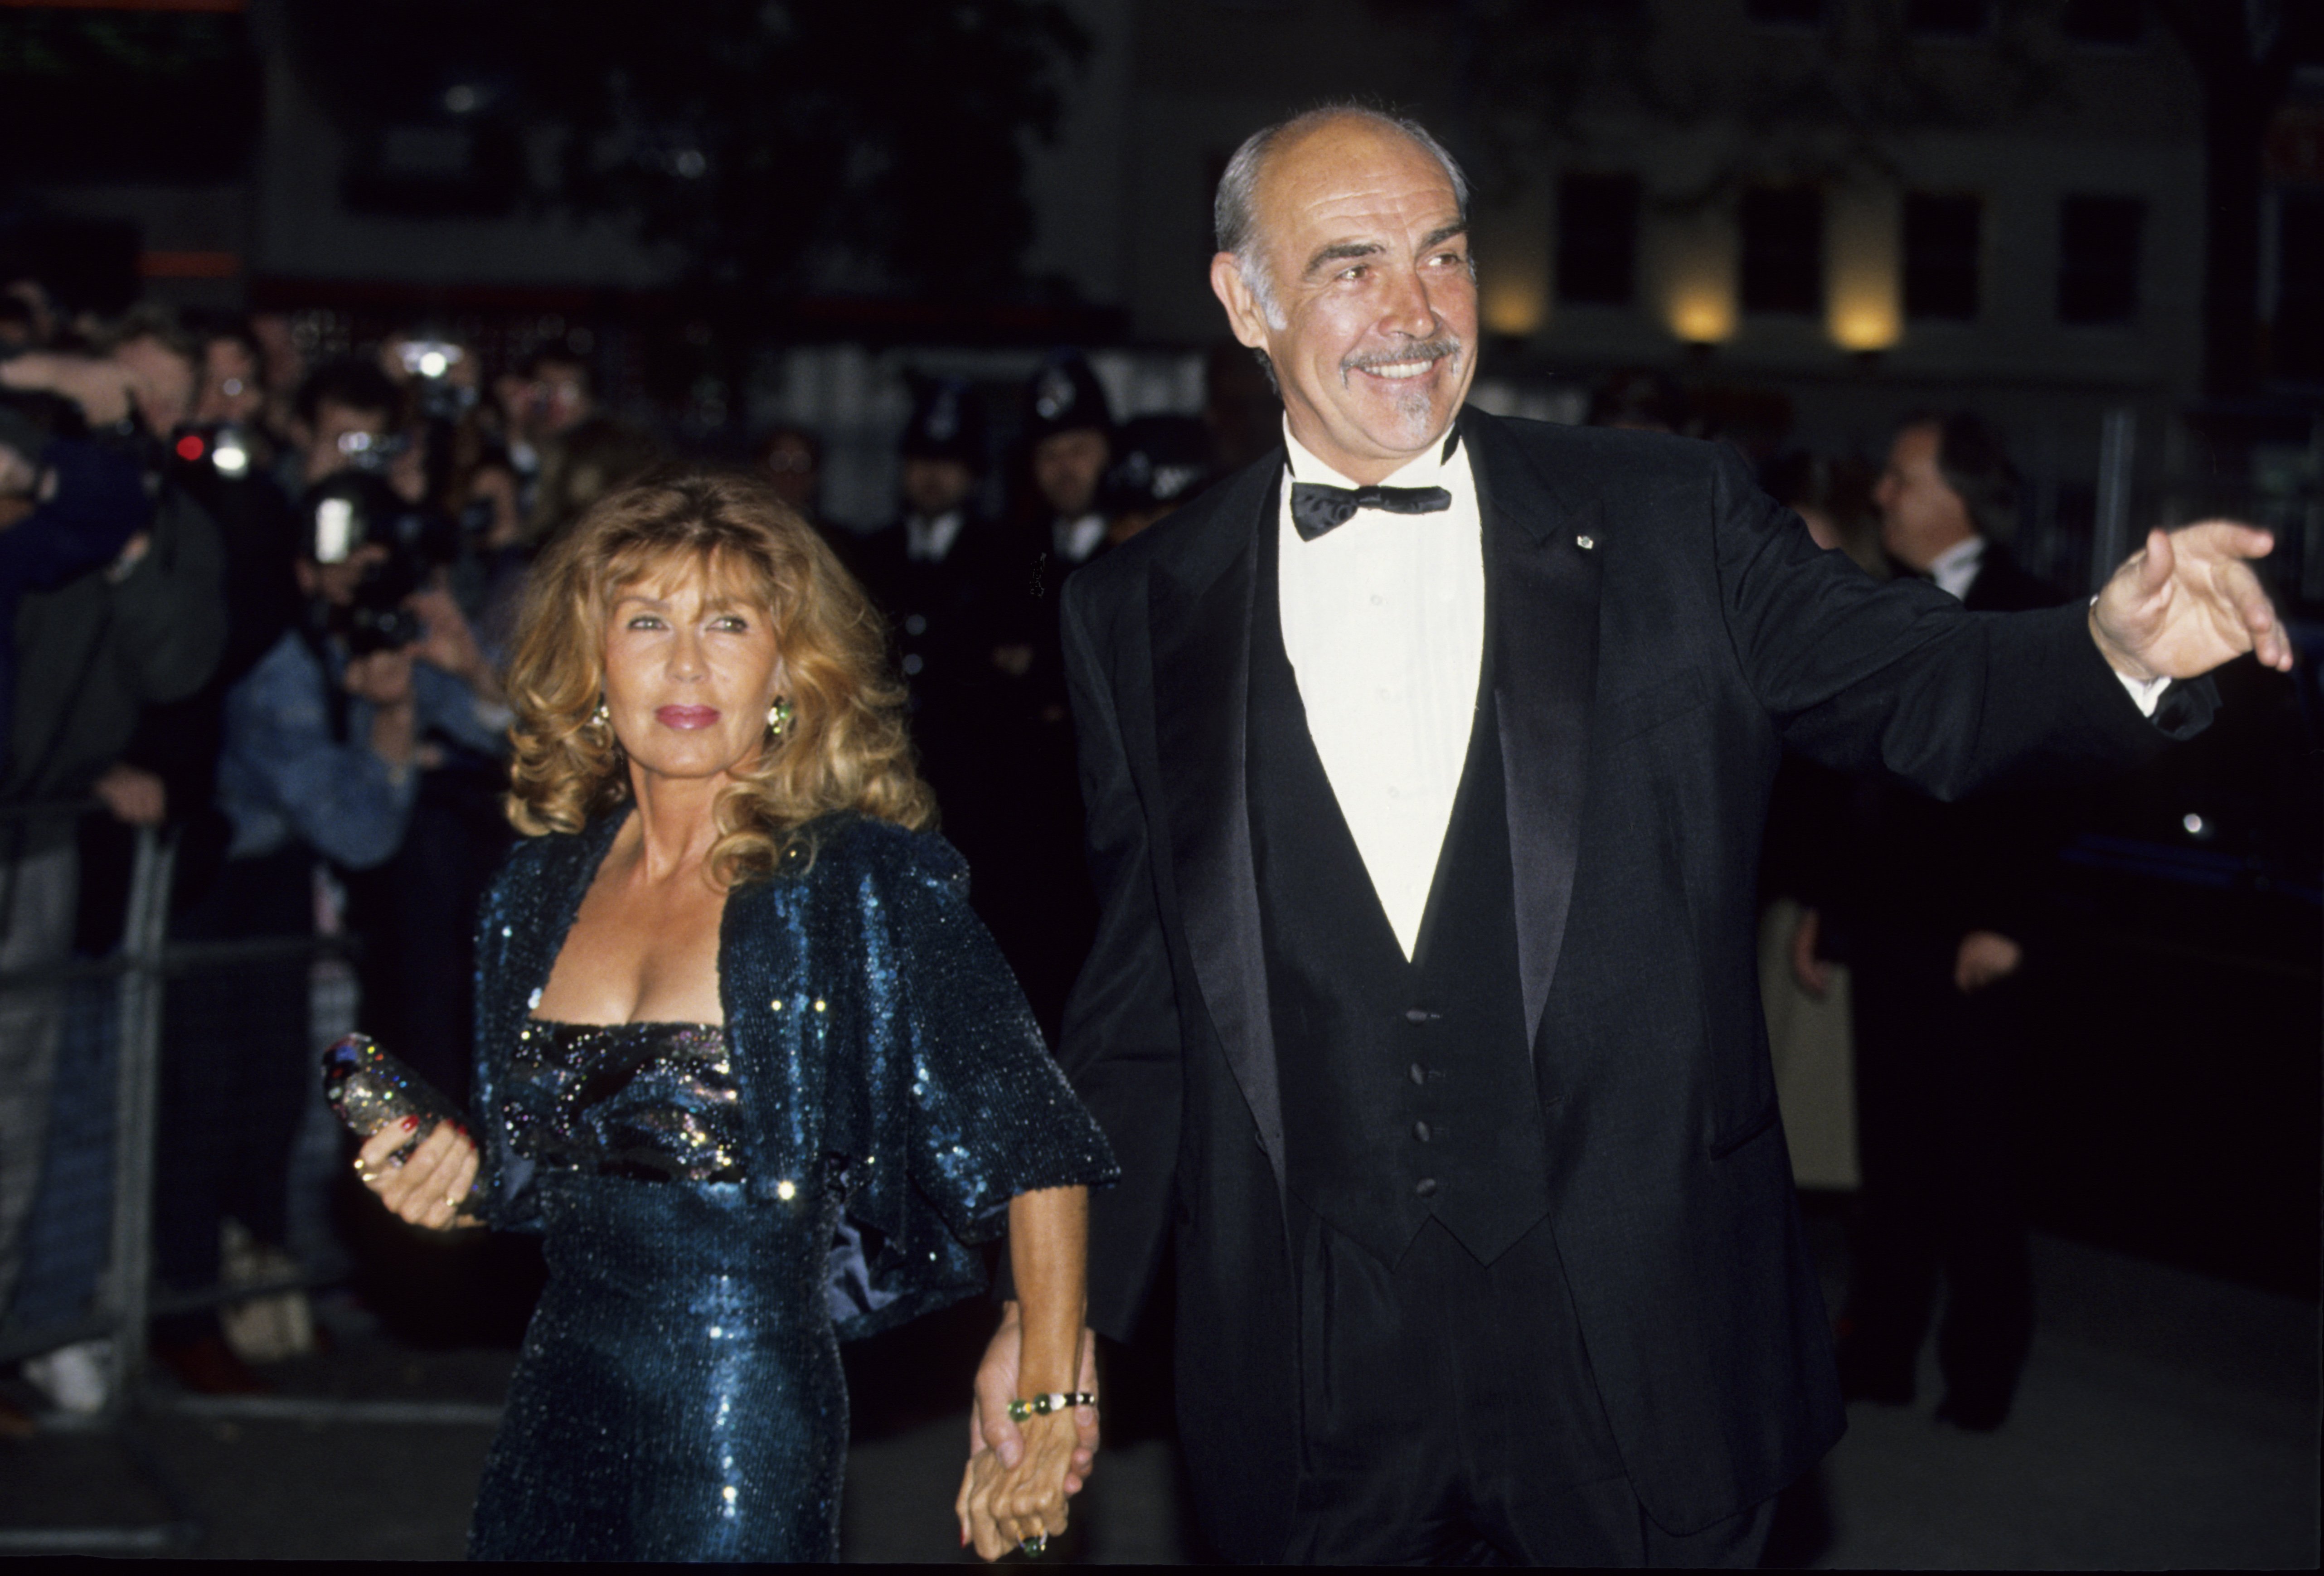 Sean Connery and Micheline Roquebrune during a premiere in 1990, London. / Source: Getty Images